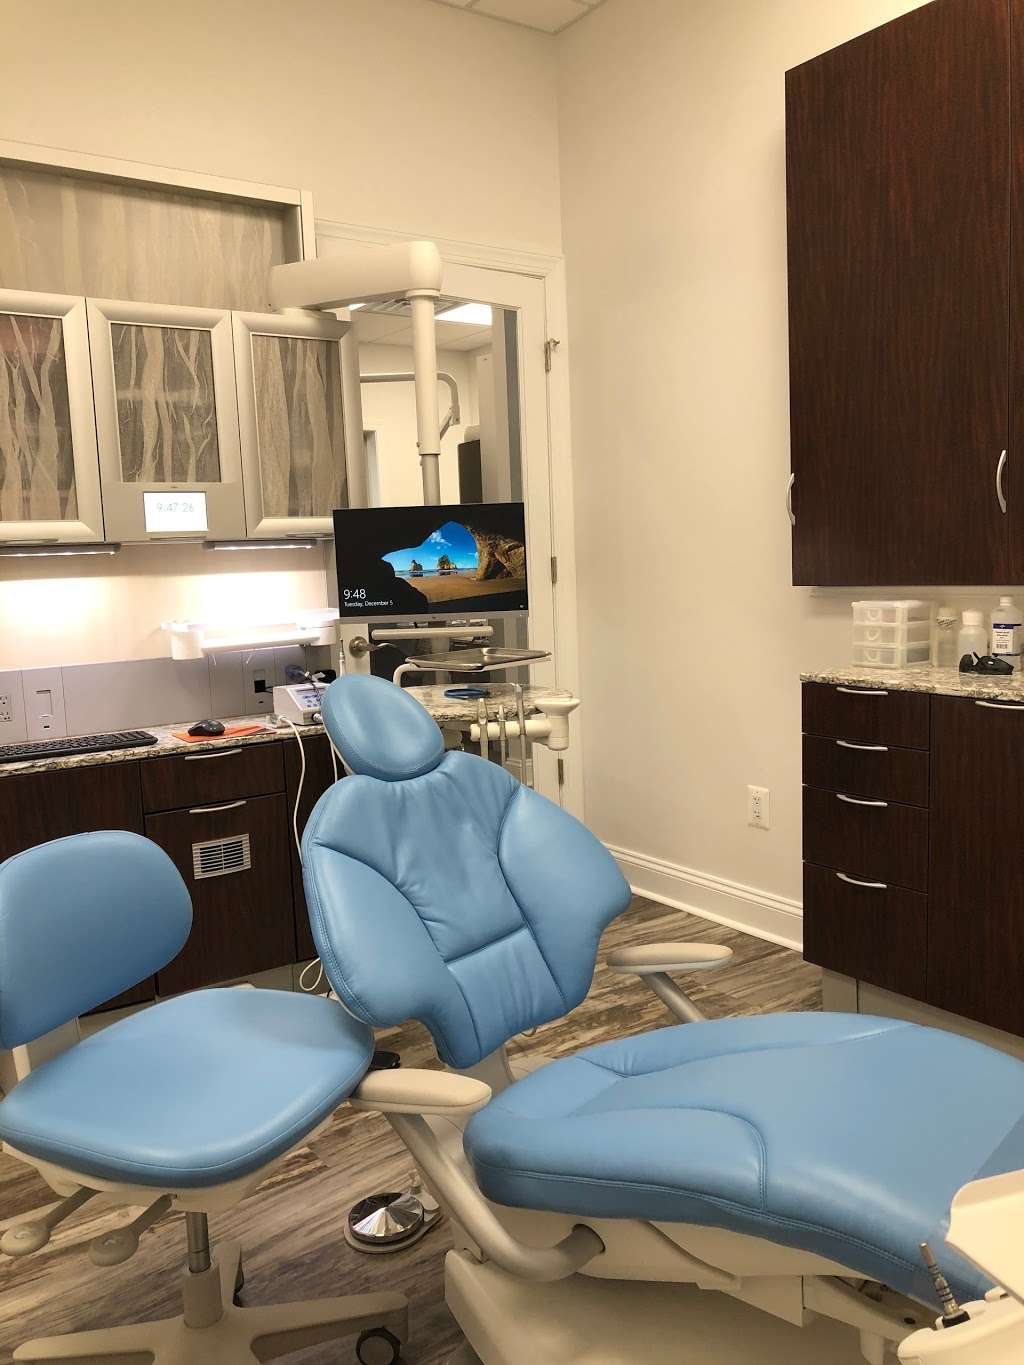 Patuxent Dental | 44210 Airport View Dr, Hollywood, MD 20636 | Phone: (301) 373-3230